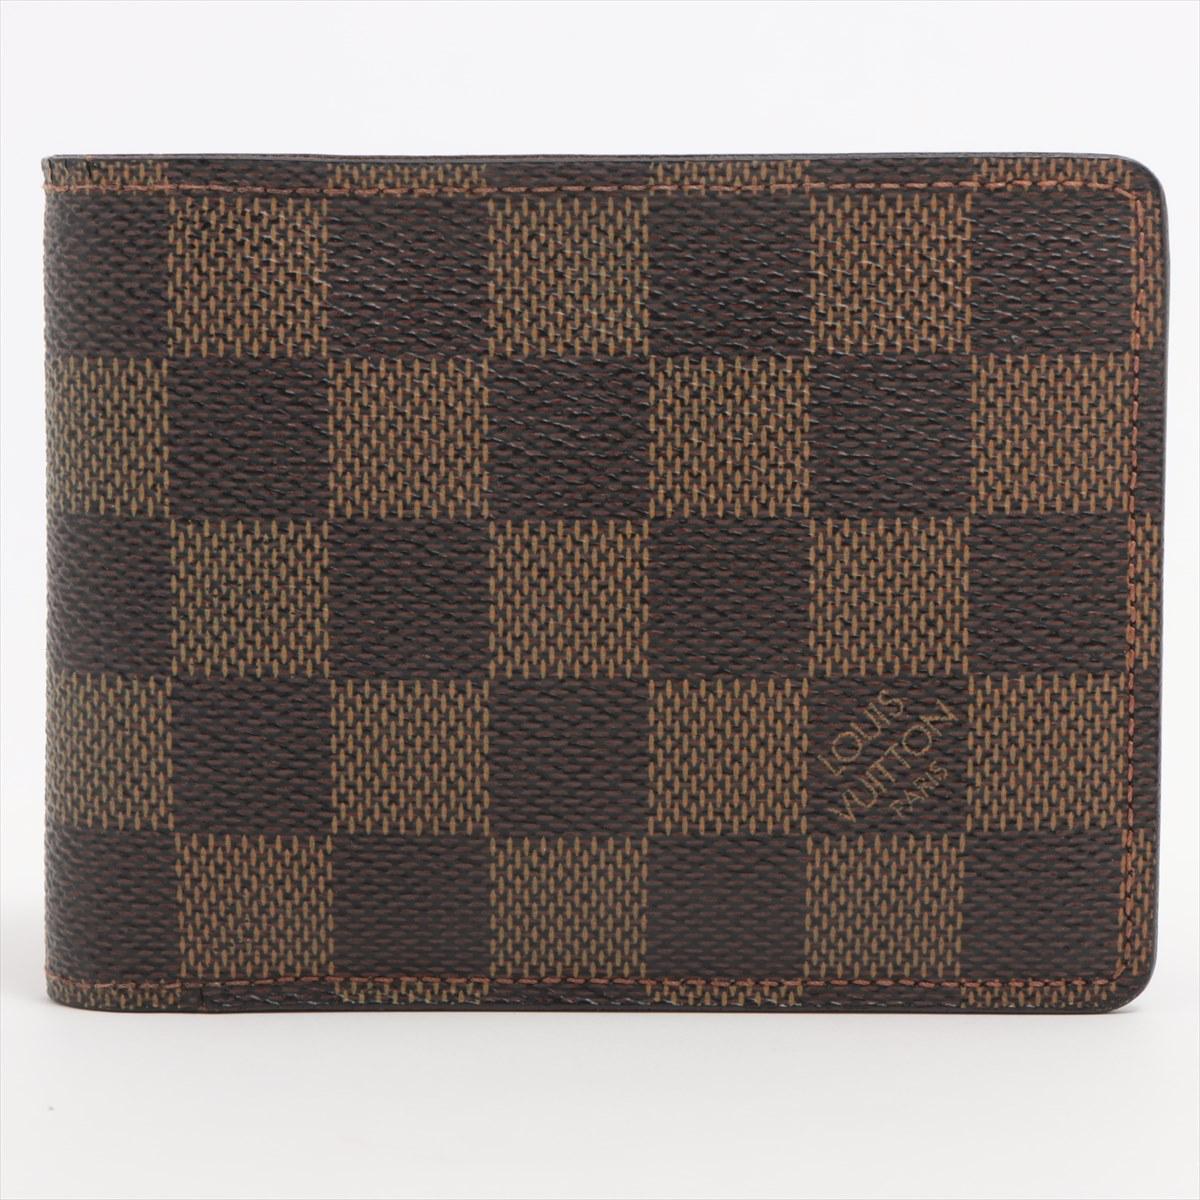 The Louis Vuitton Damier Ebene Multiple Wallet a refined and practical accessory that seamlessly combines luxury with everyday functionality. Meticulously crafted from the iconic Damier Ebene canvas, the wallet features the classic brown